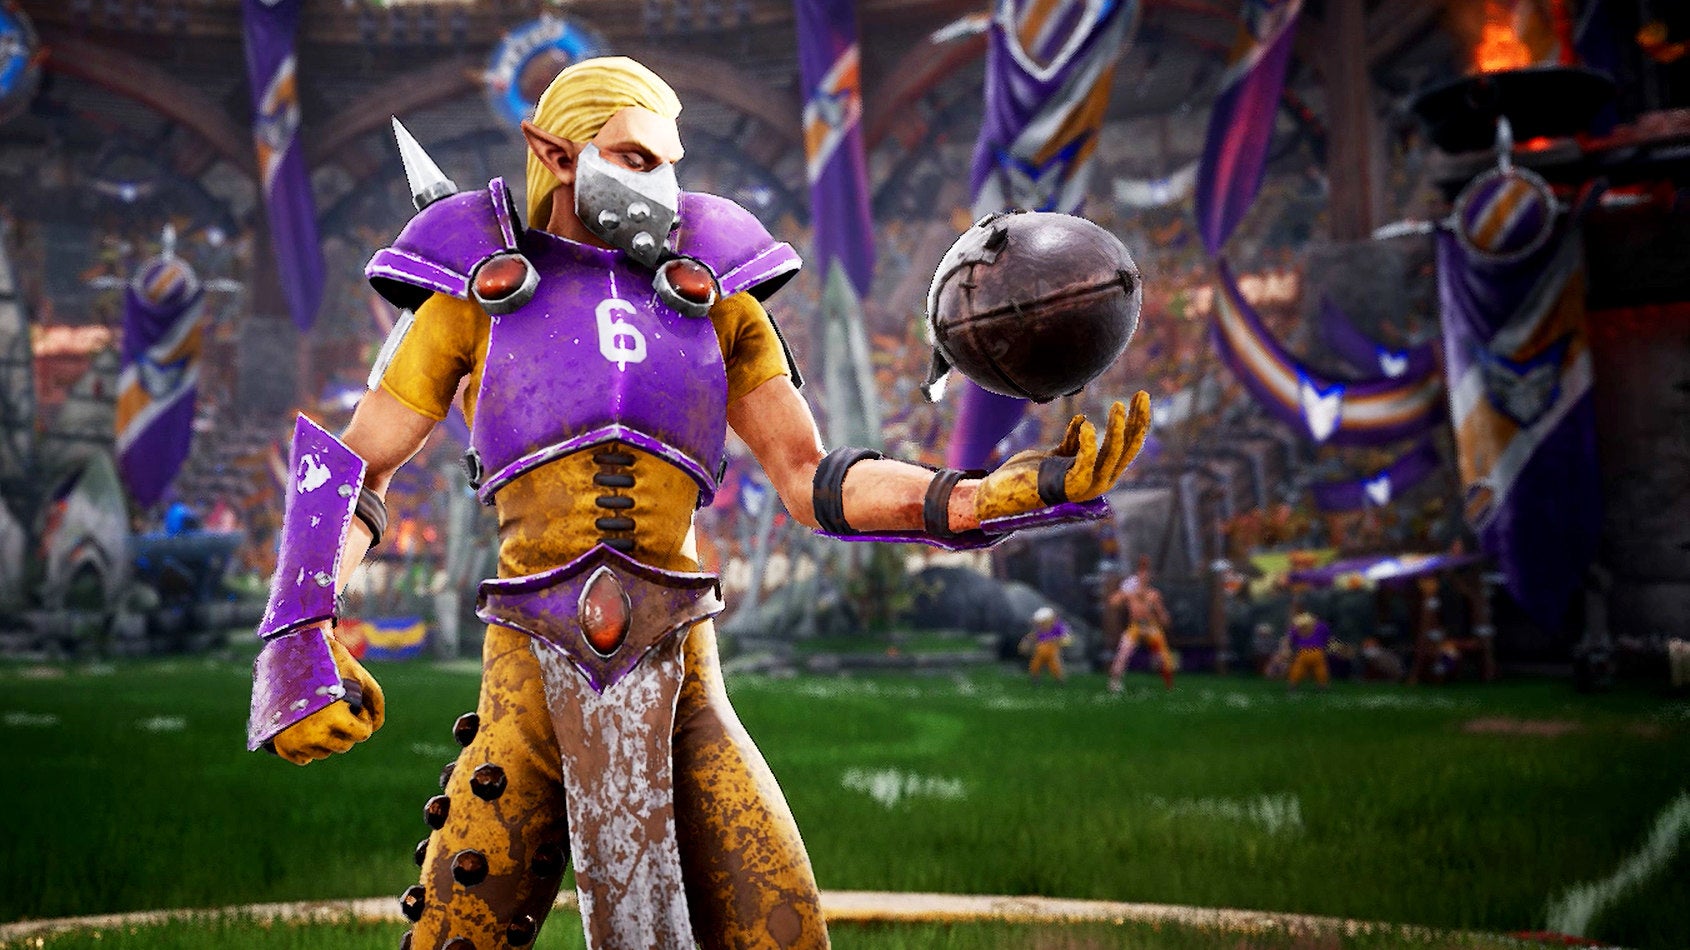 Tossing the ball in a Blood Bowl 3 screenshot.